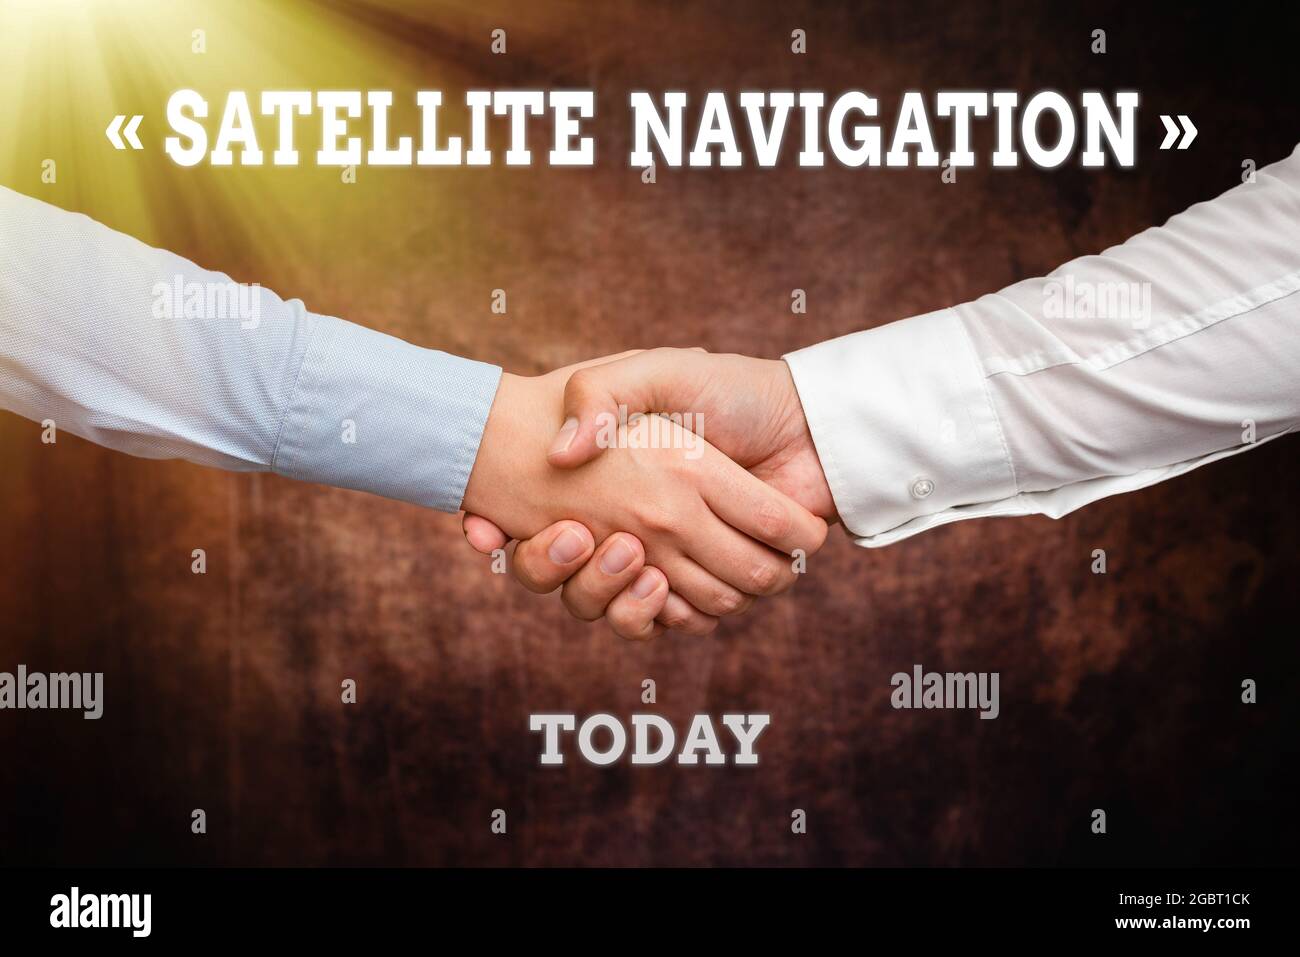 Sign displaying Satellite Navigation. Concept meaning system providing autonomous geospatial positioning Two Professional Well-Dressed Corporate Stock Photo